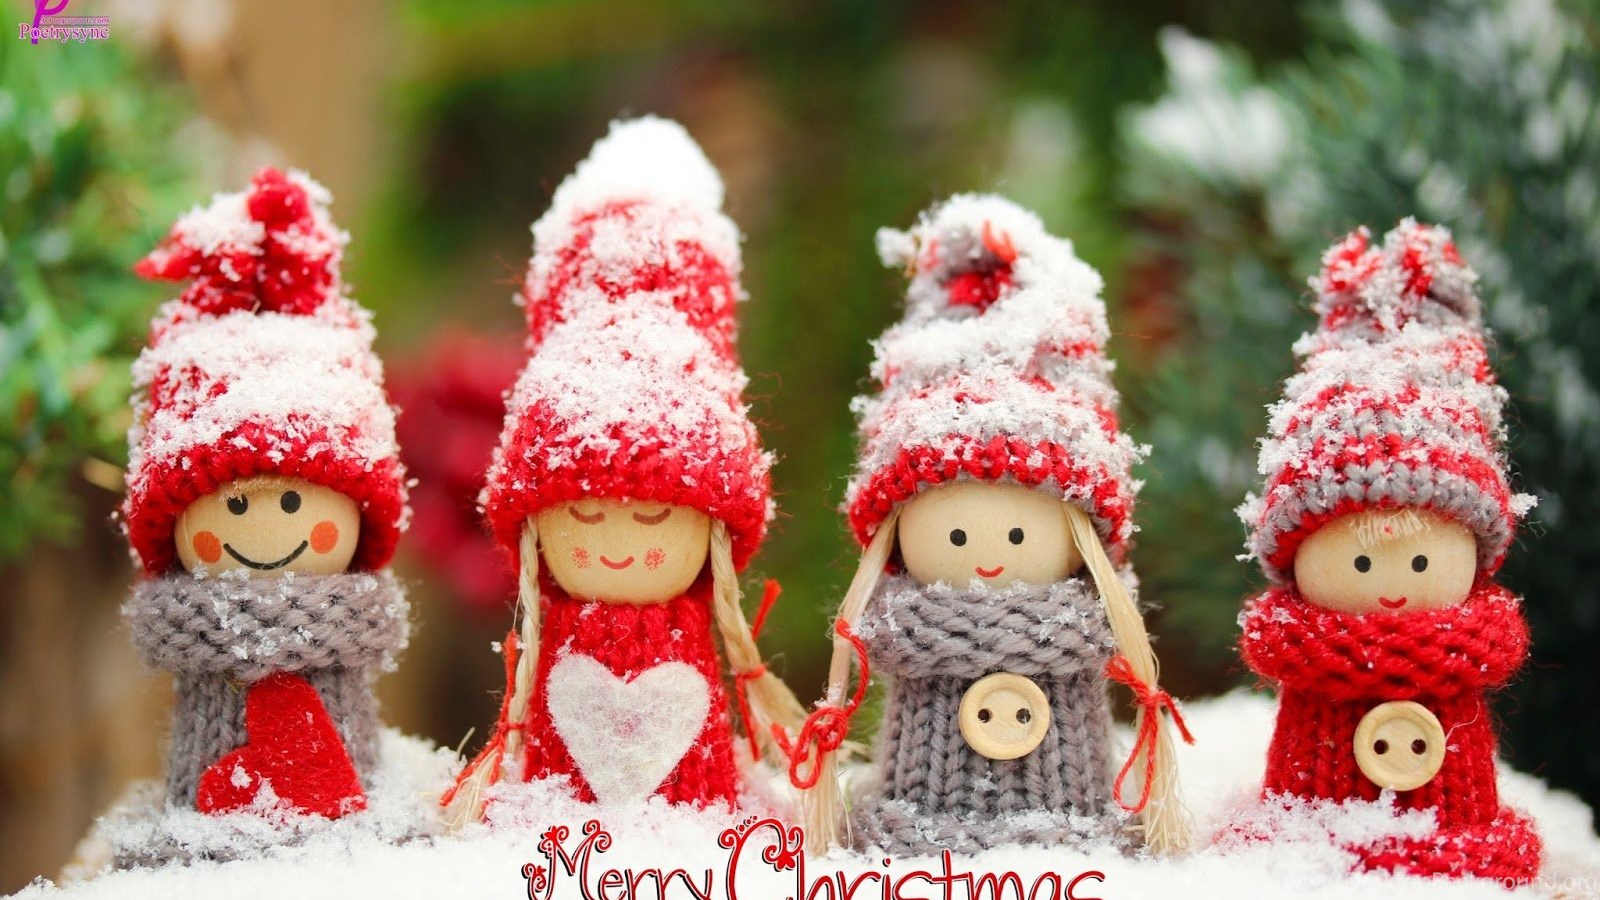 Cute Christmas Wishes Wallpaper For Kids With Quotes New Year. Desktop Background